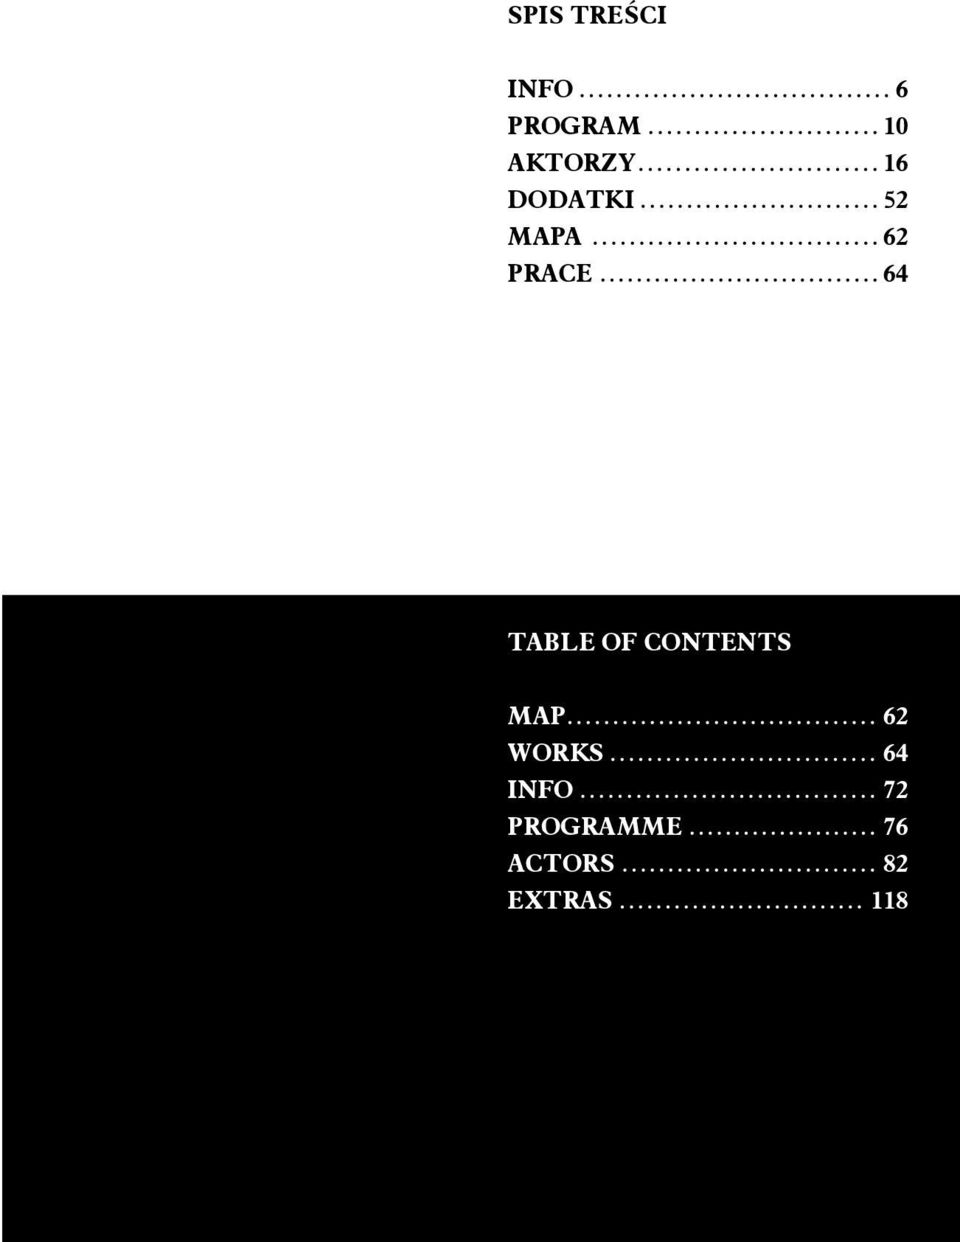 64 TABLE OF CONTENTS MAP 62 WORKS